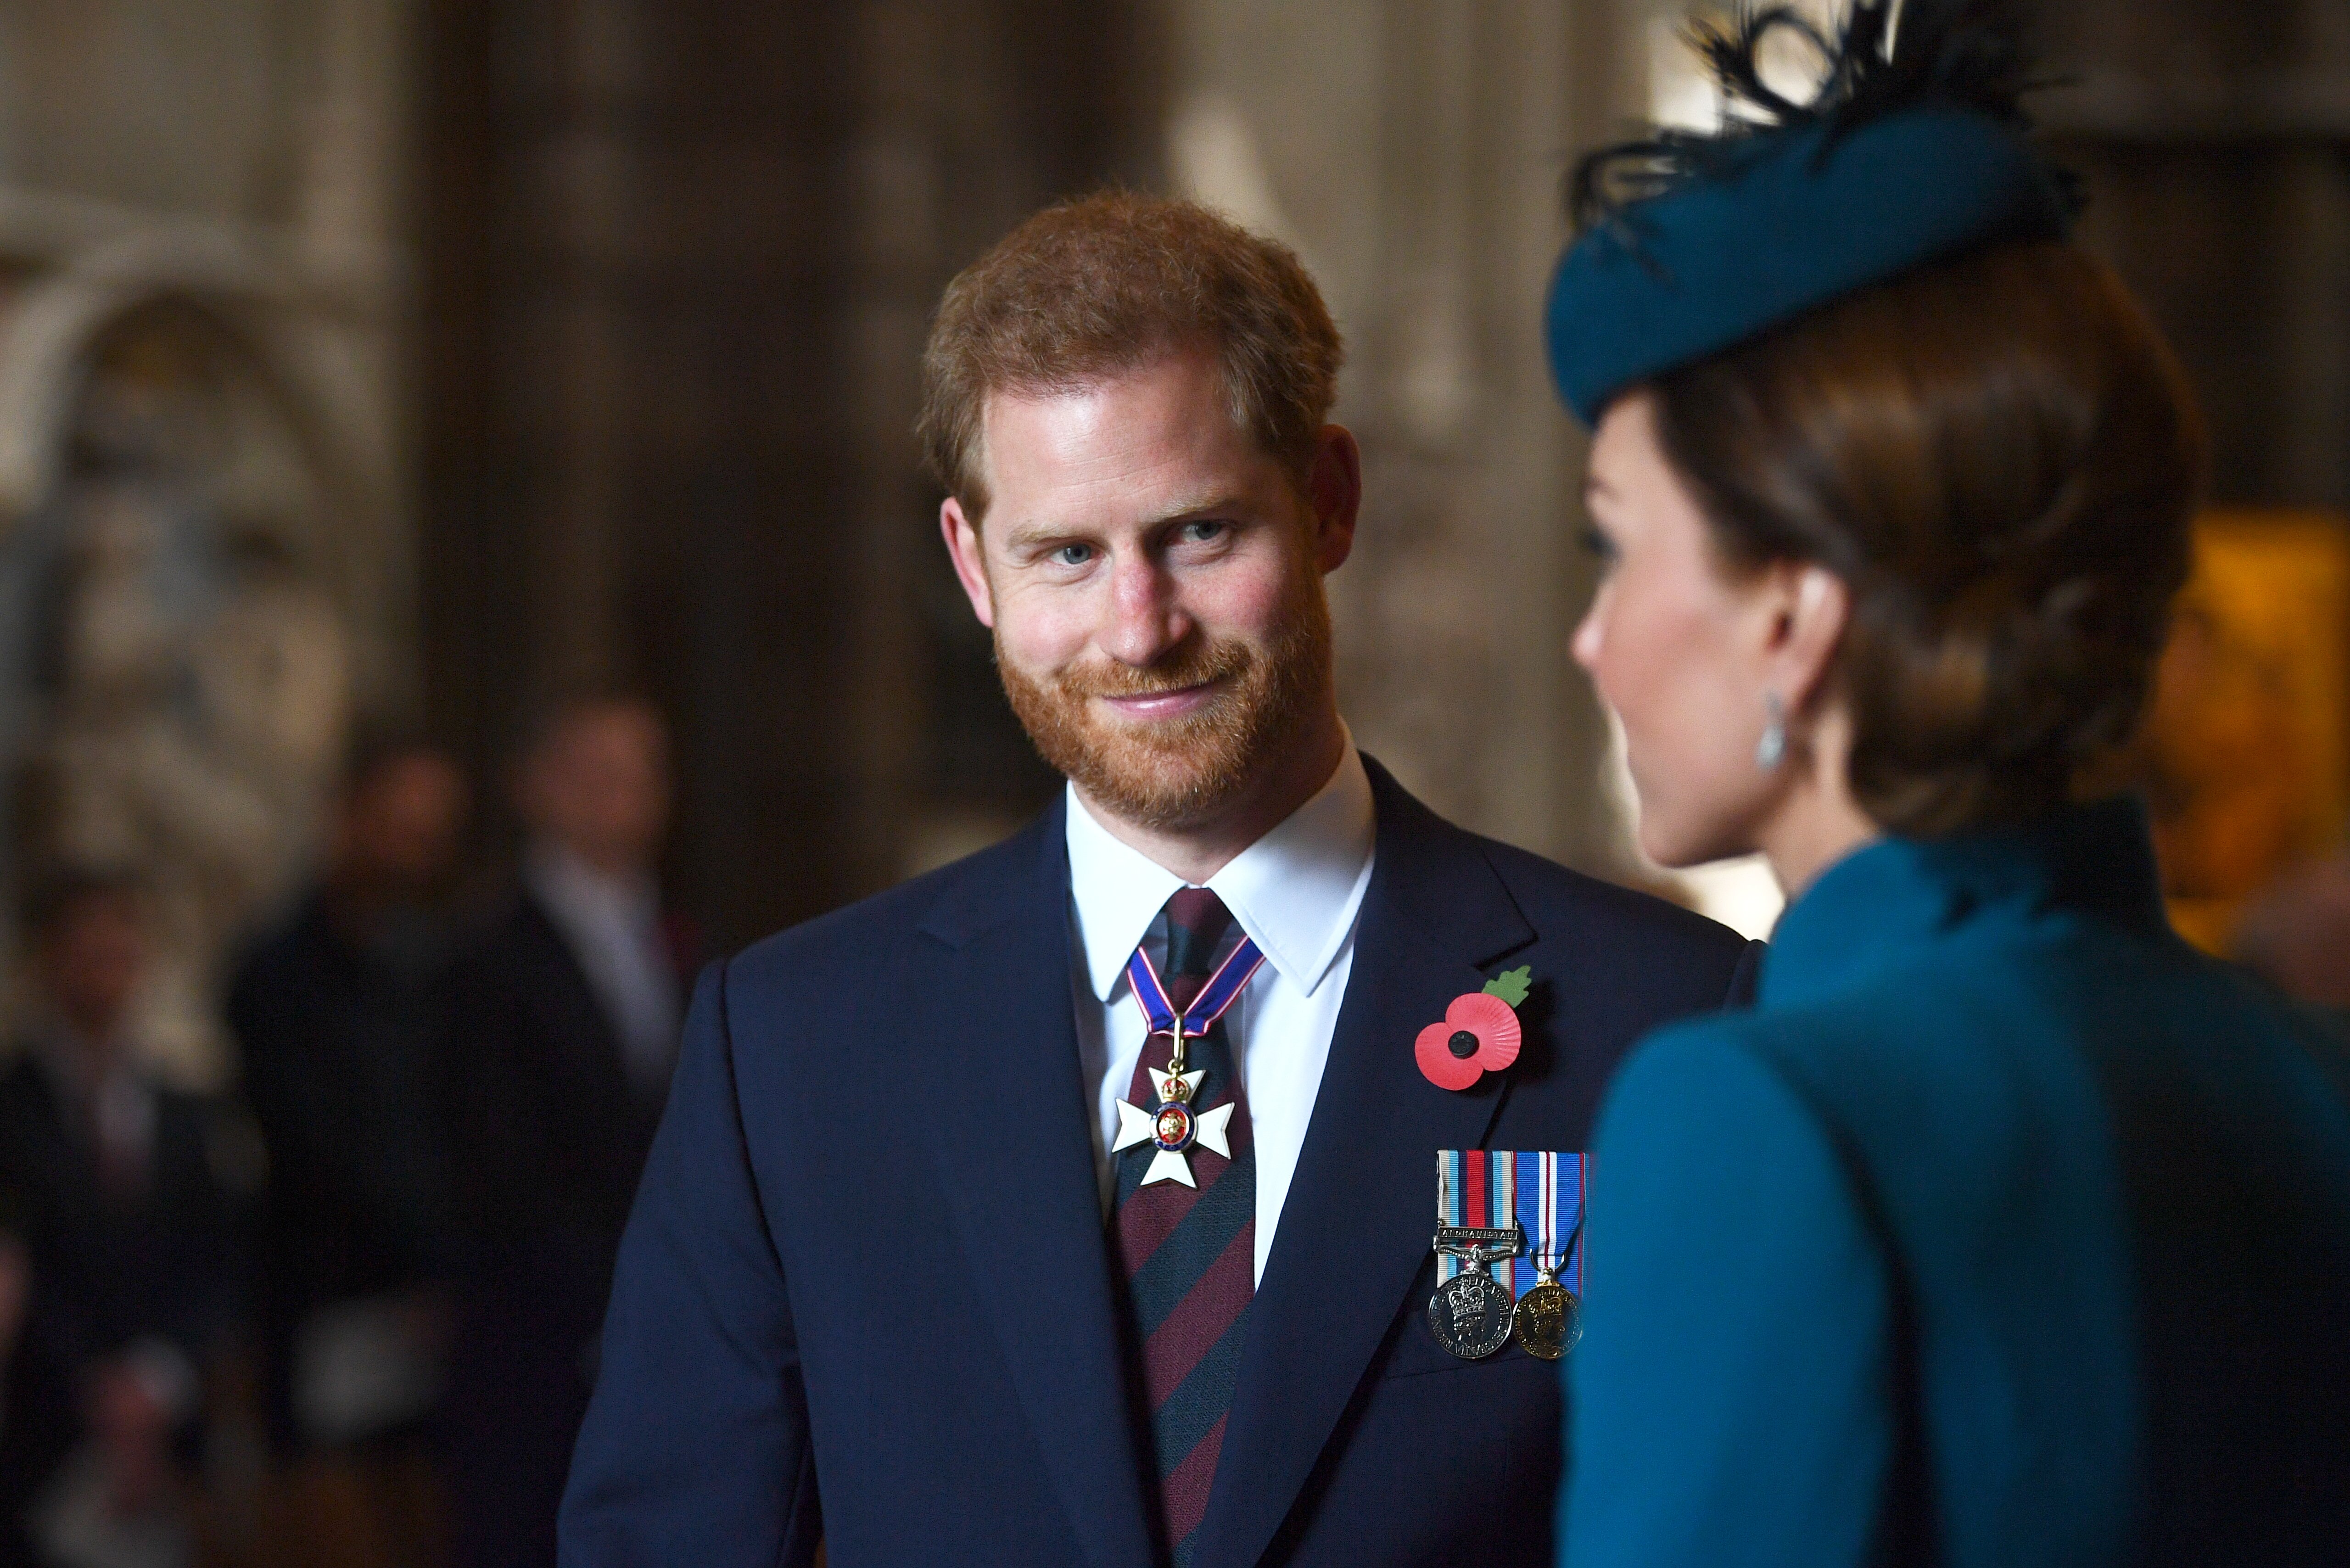 Kate Middleton and Prince Harry during the ANZAC Day Service of Commemoration and Thanksgiving at Westminster Abbey on April 25, 2019 in London, United Kingdom. / Source: Getty Images